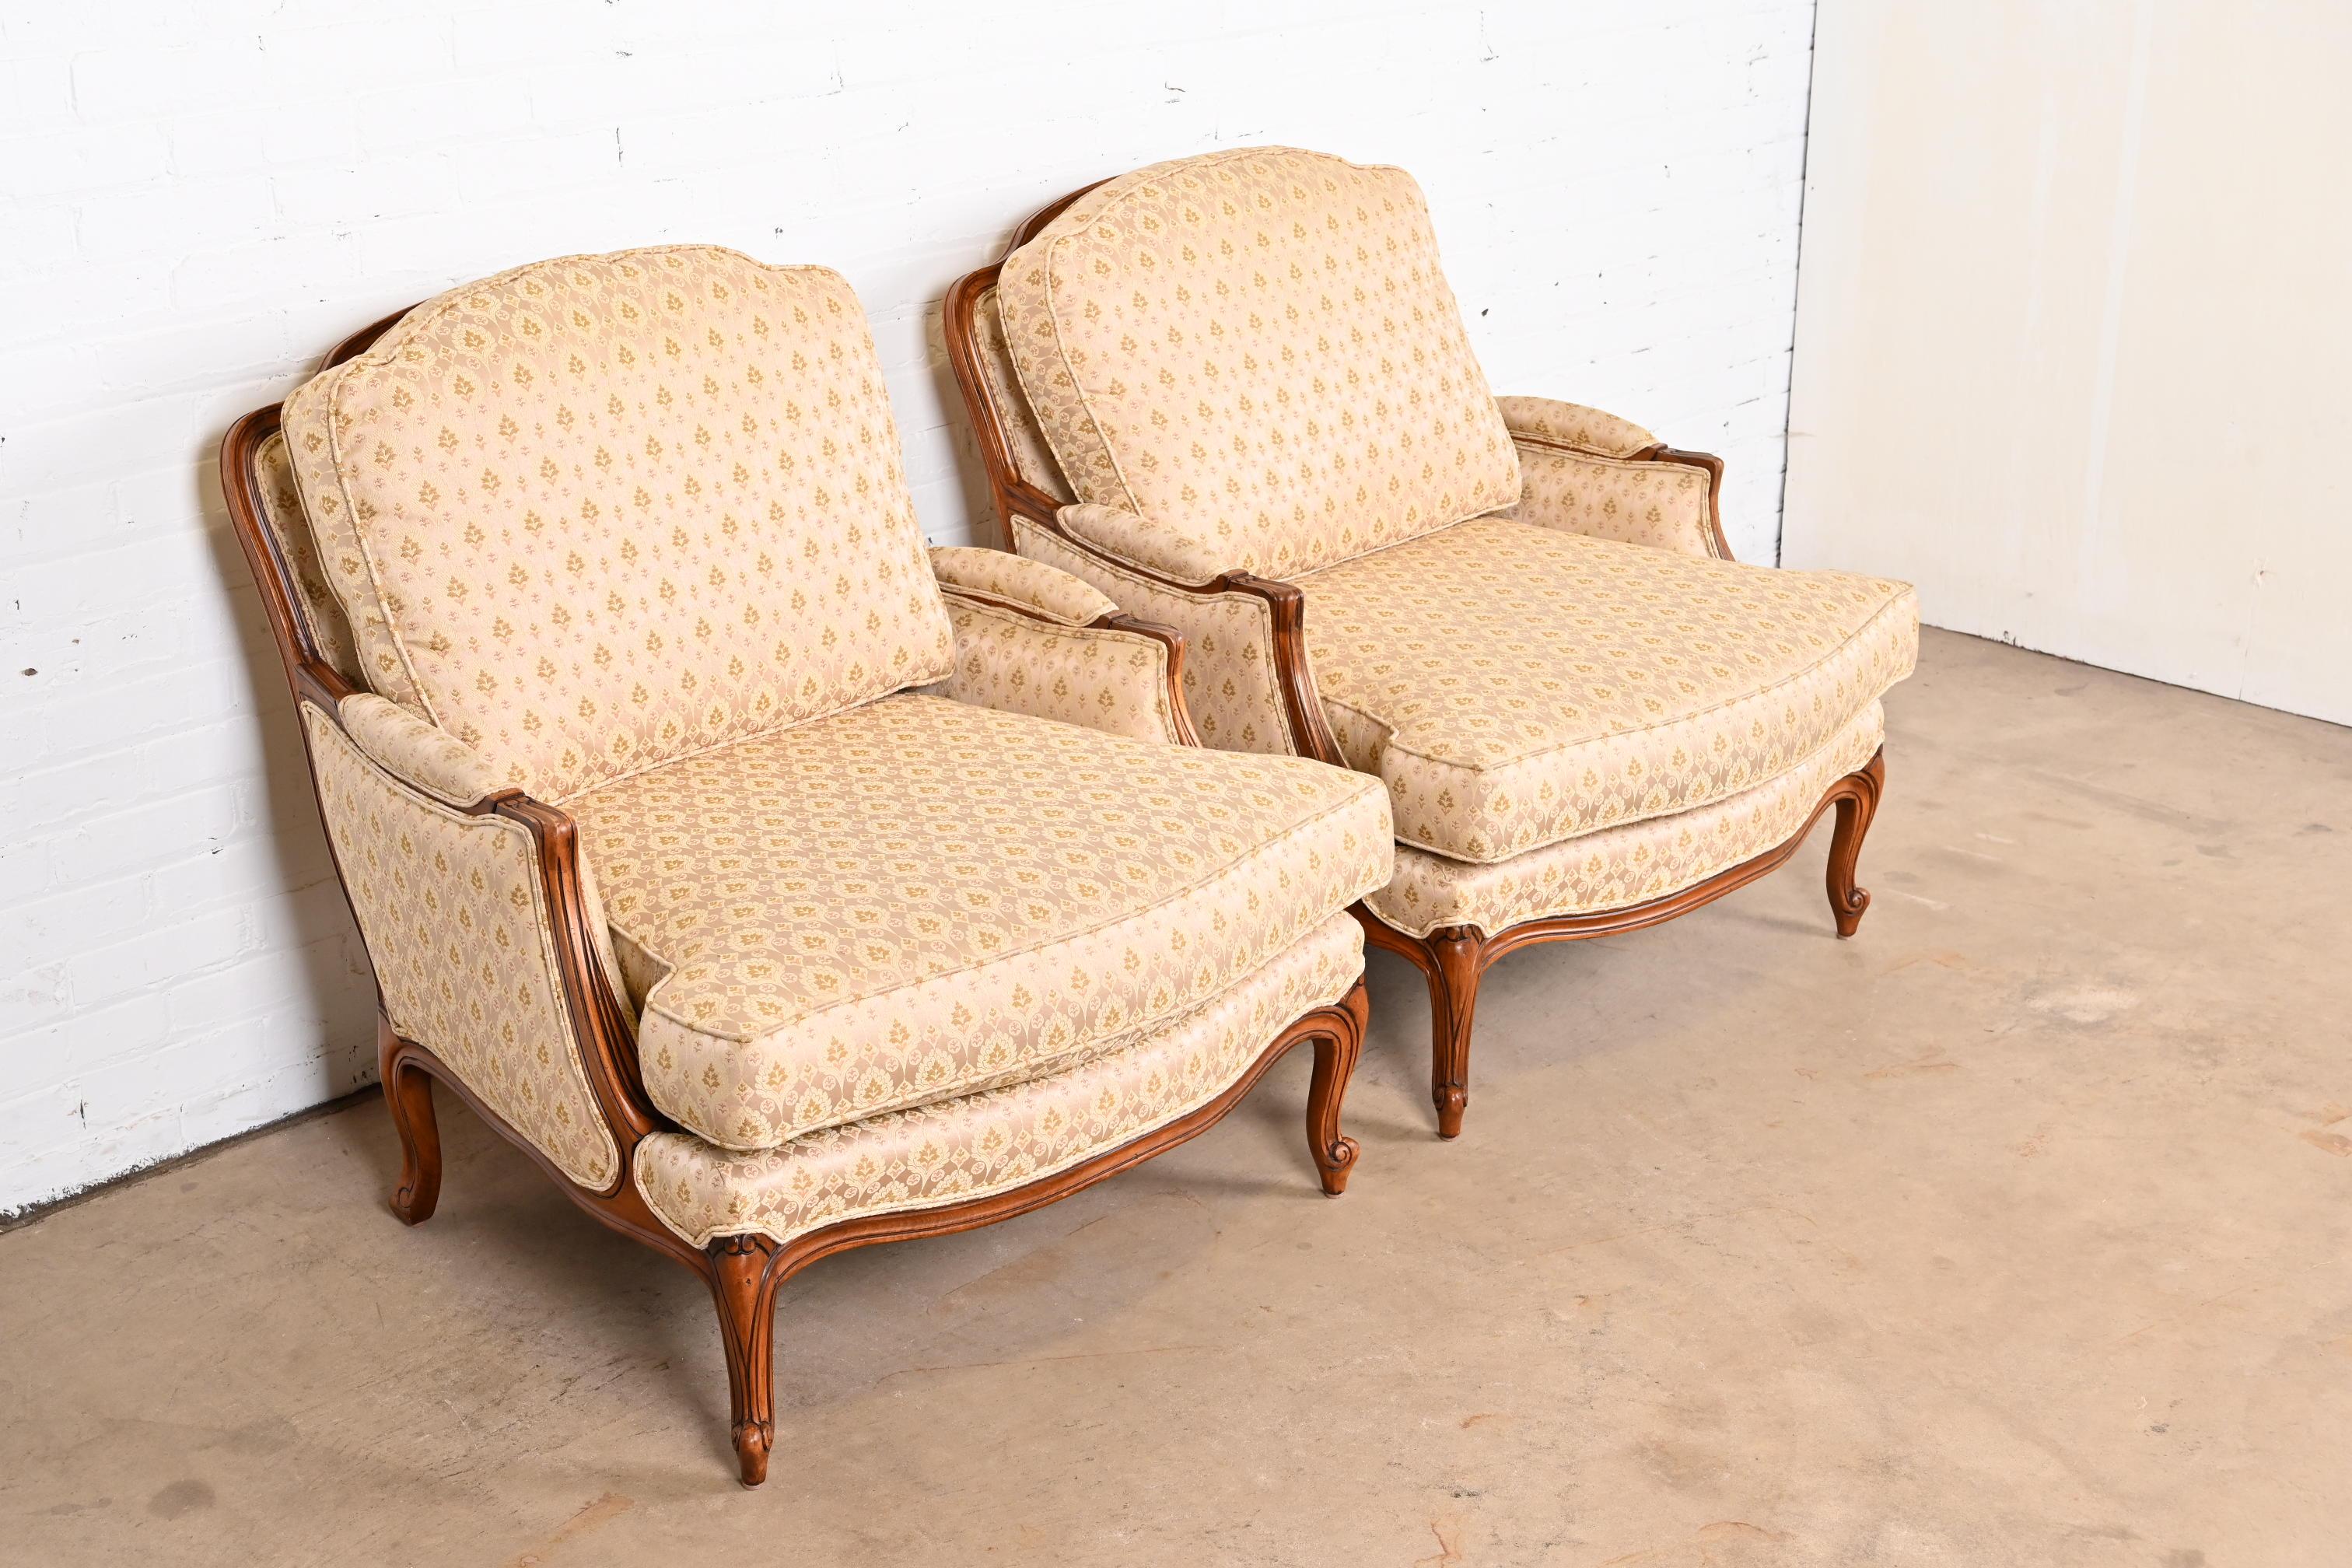 ethan allen french country chairs